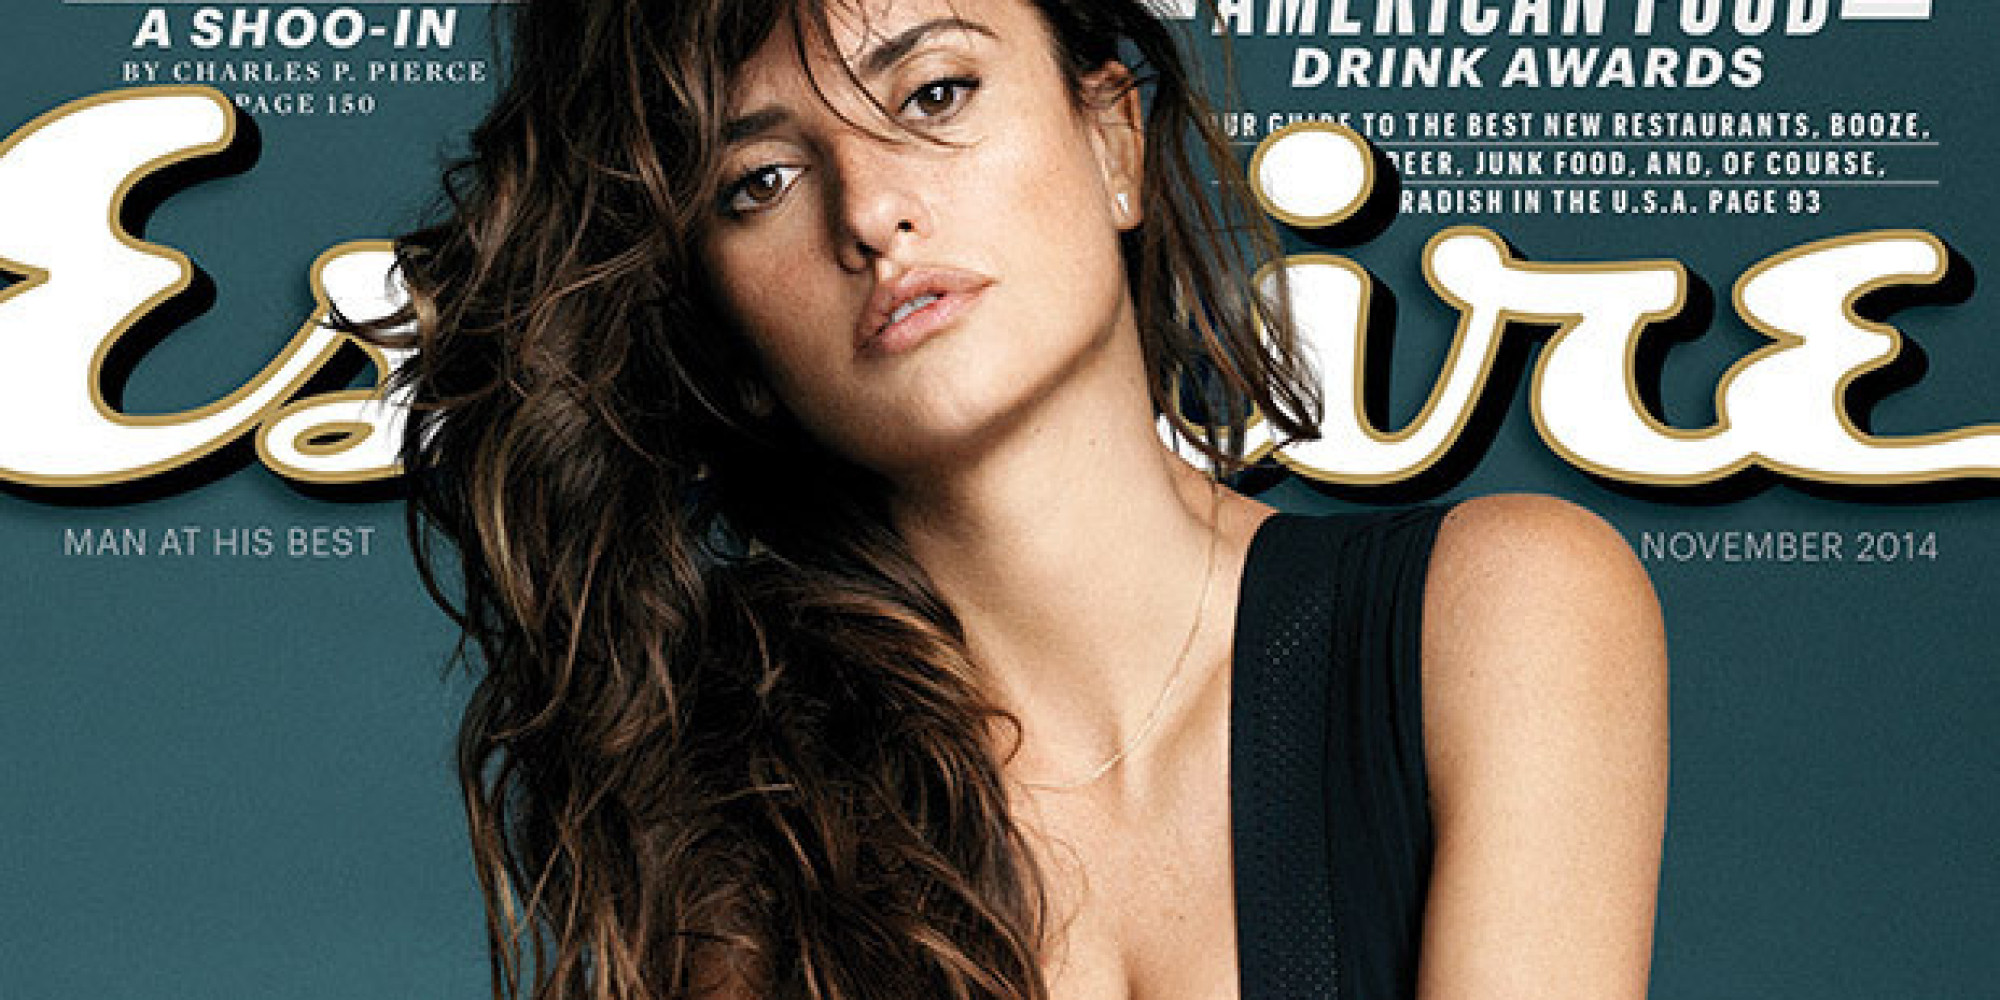 Penelope Cruz Named Sexiest Woman Alive By Esquire